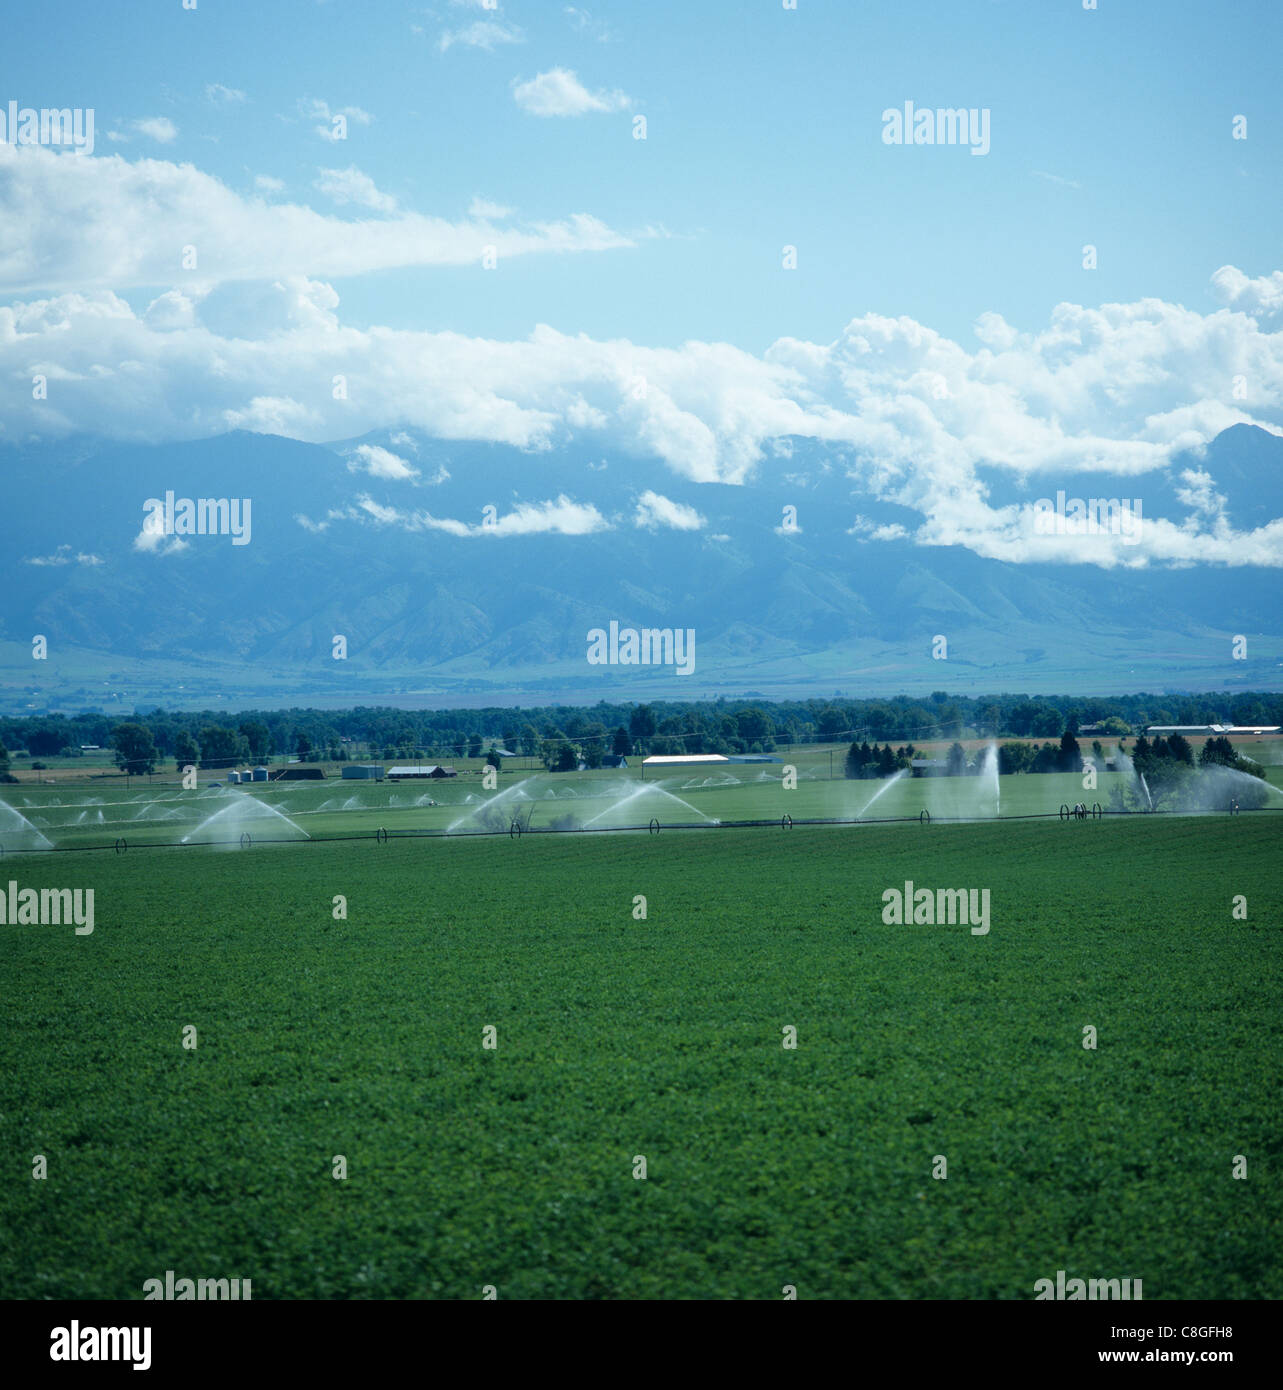 Pivoted boom sprinkler irrigating alfalfa crop shortly after cutting, Montana, USA Stock Photo